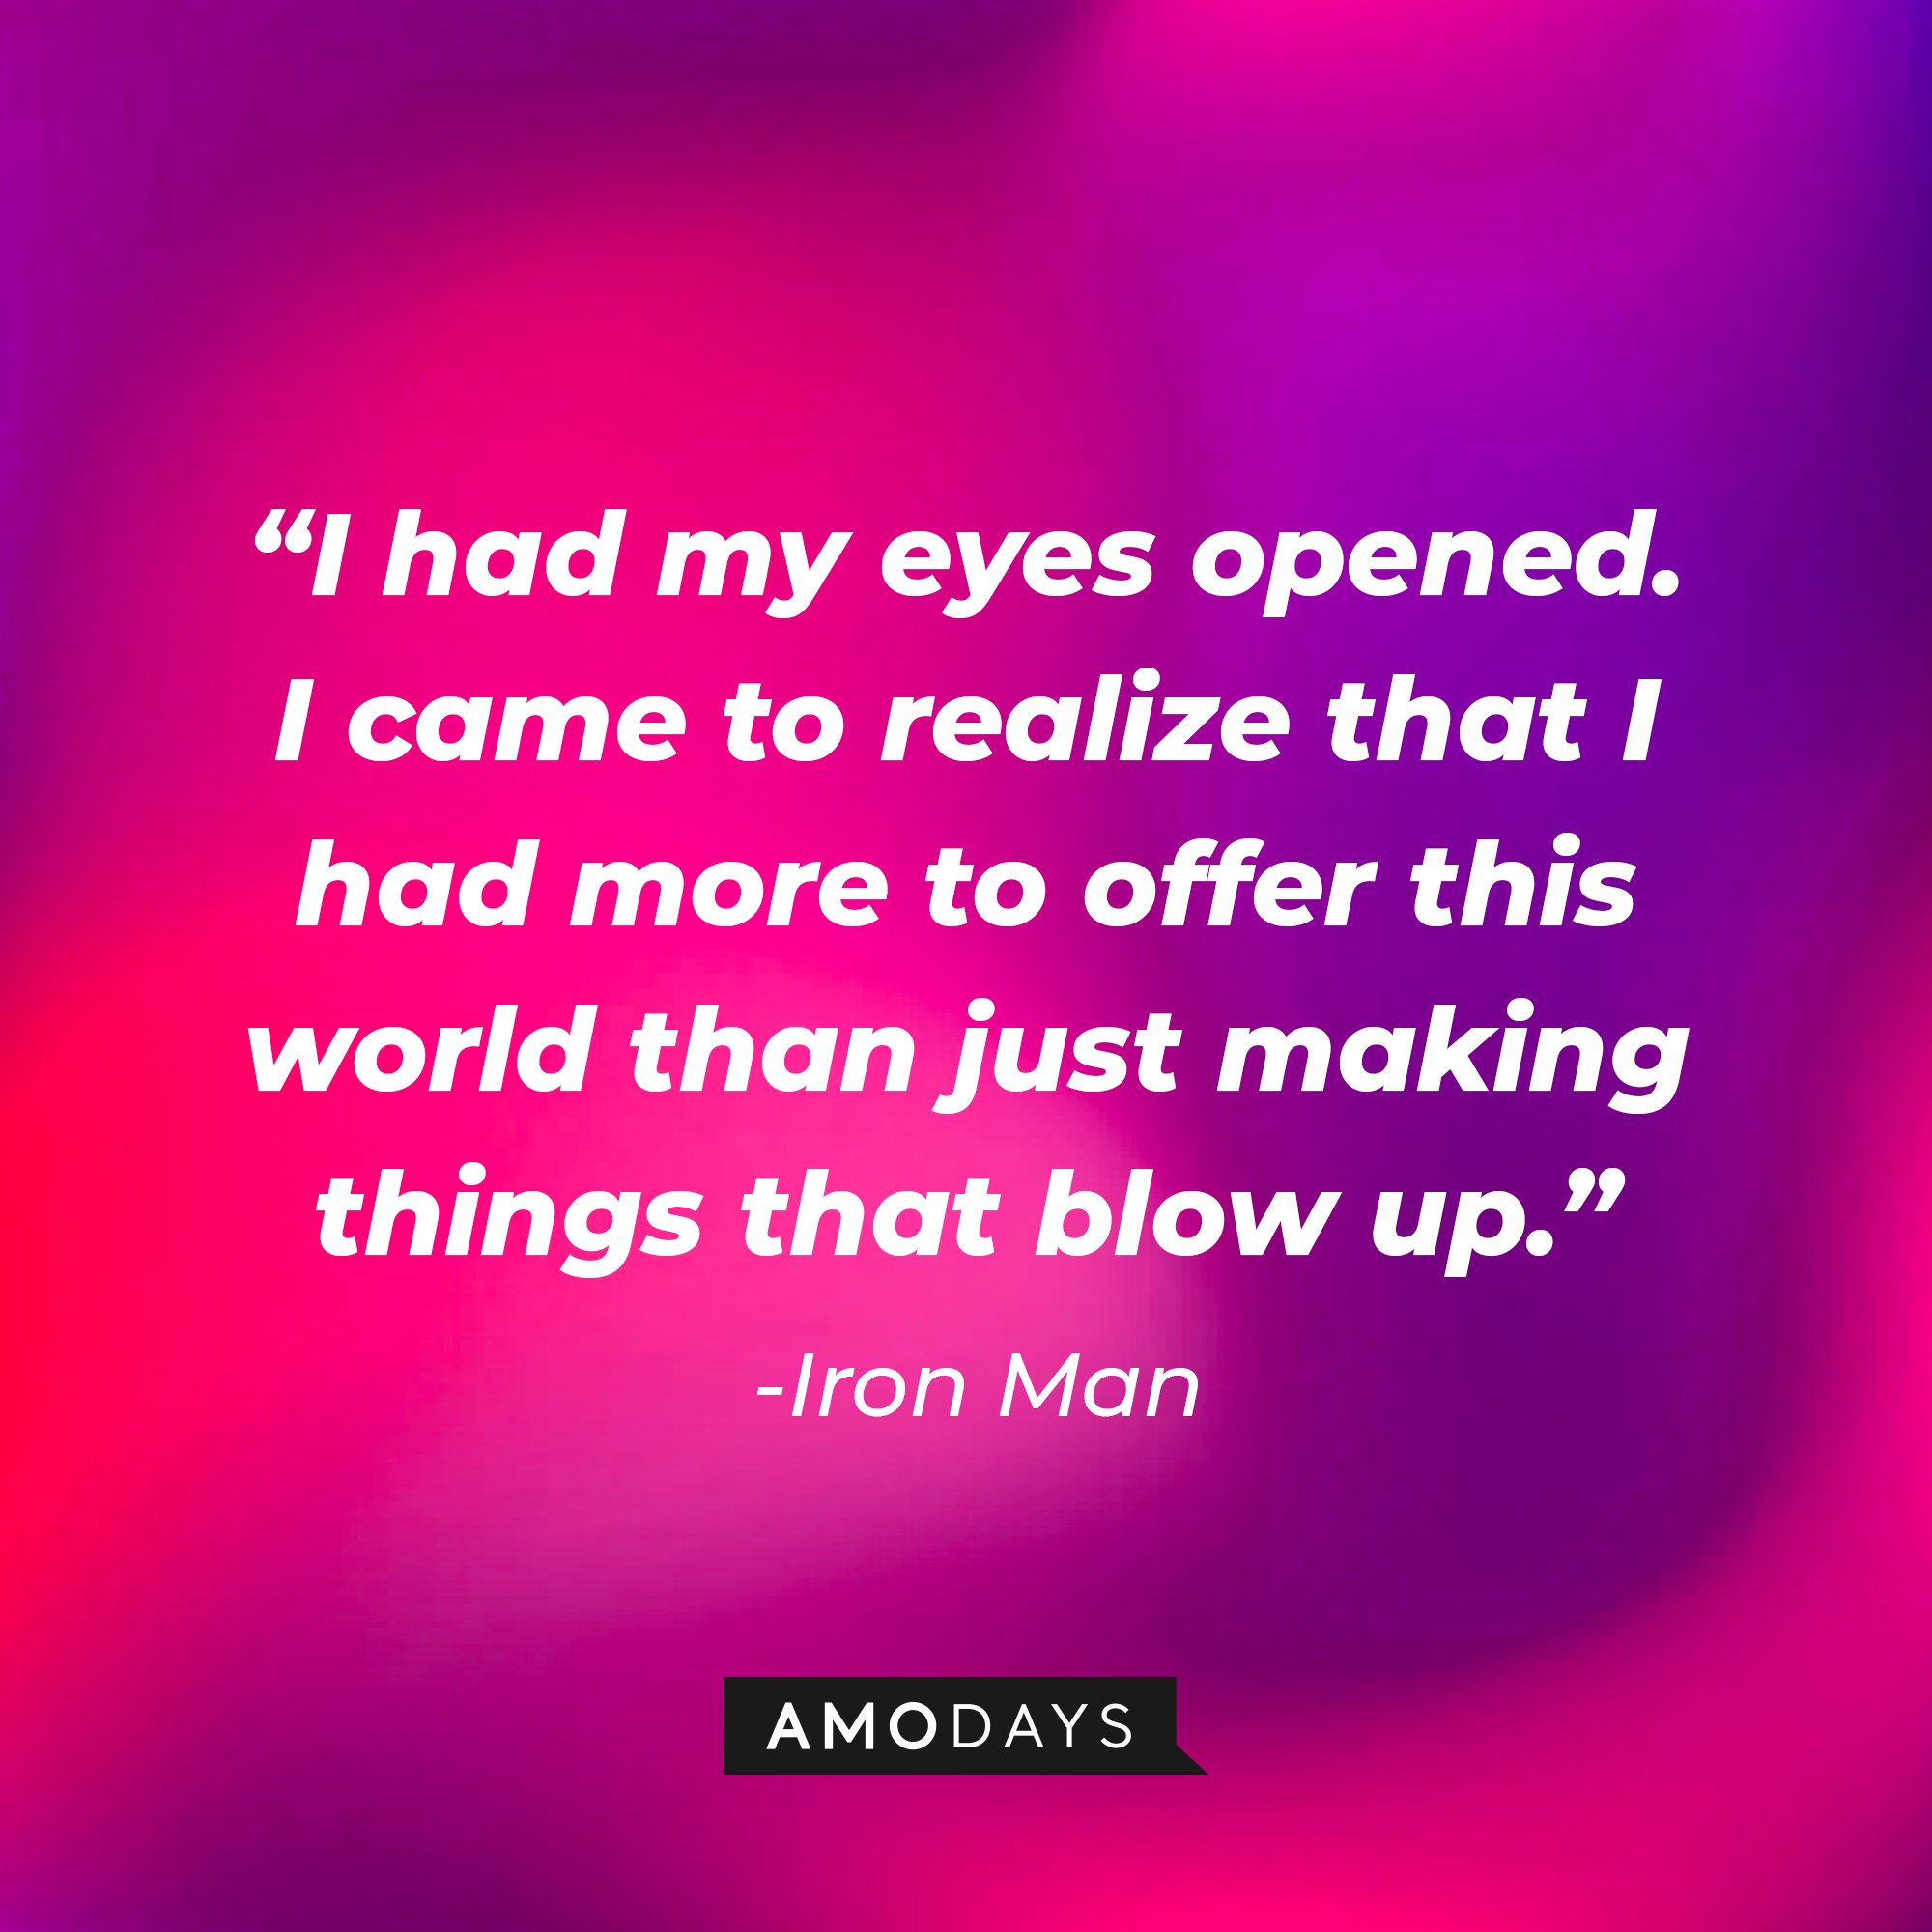 Iron Man's quote: “I had my eyes opened. I came to realize that I had more to offer this world than just making things that blow up.” | Image: AmoDays